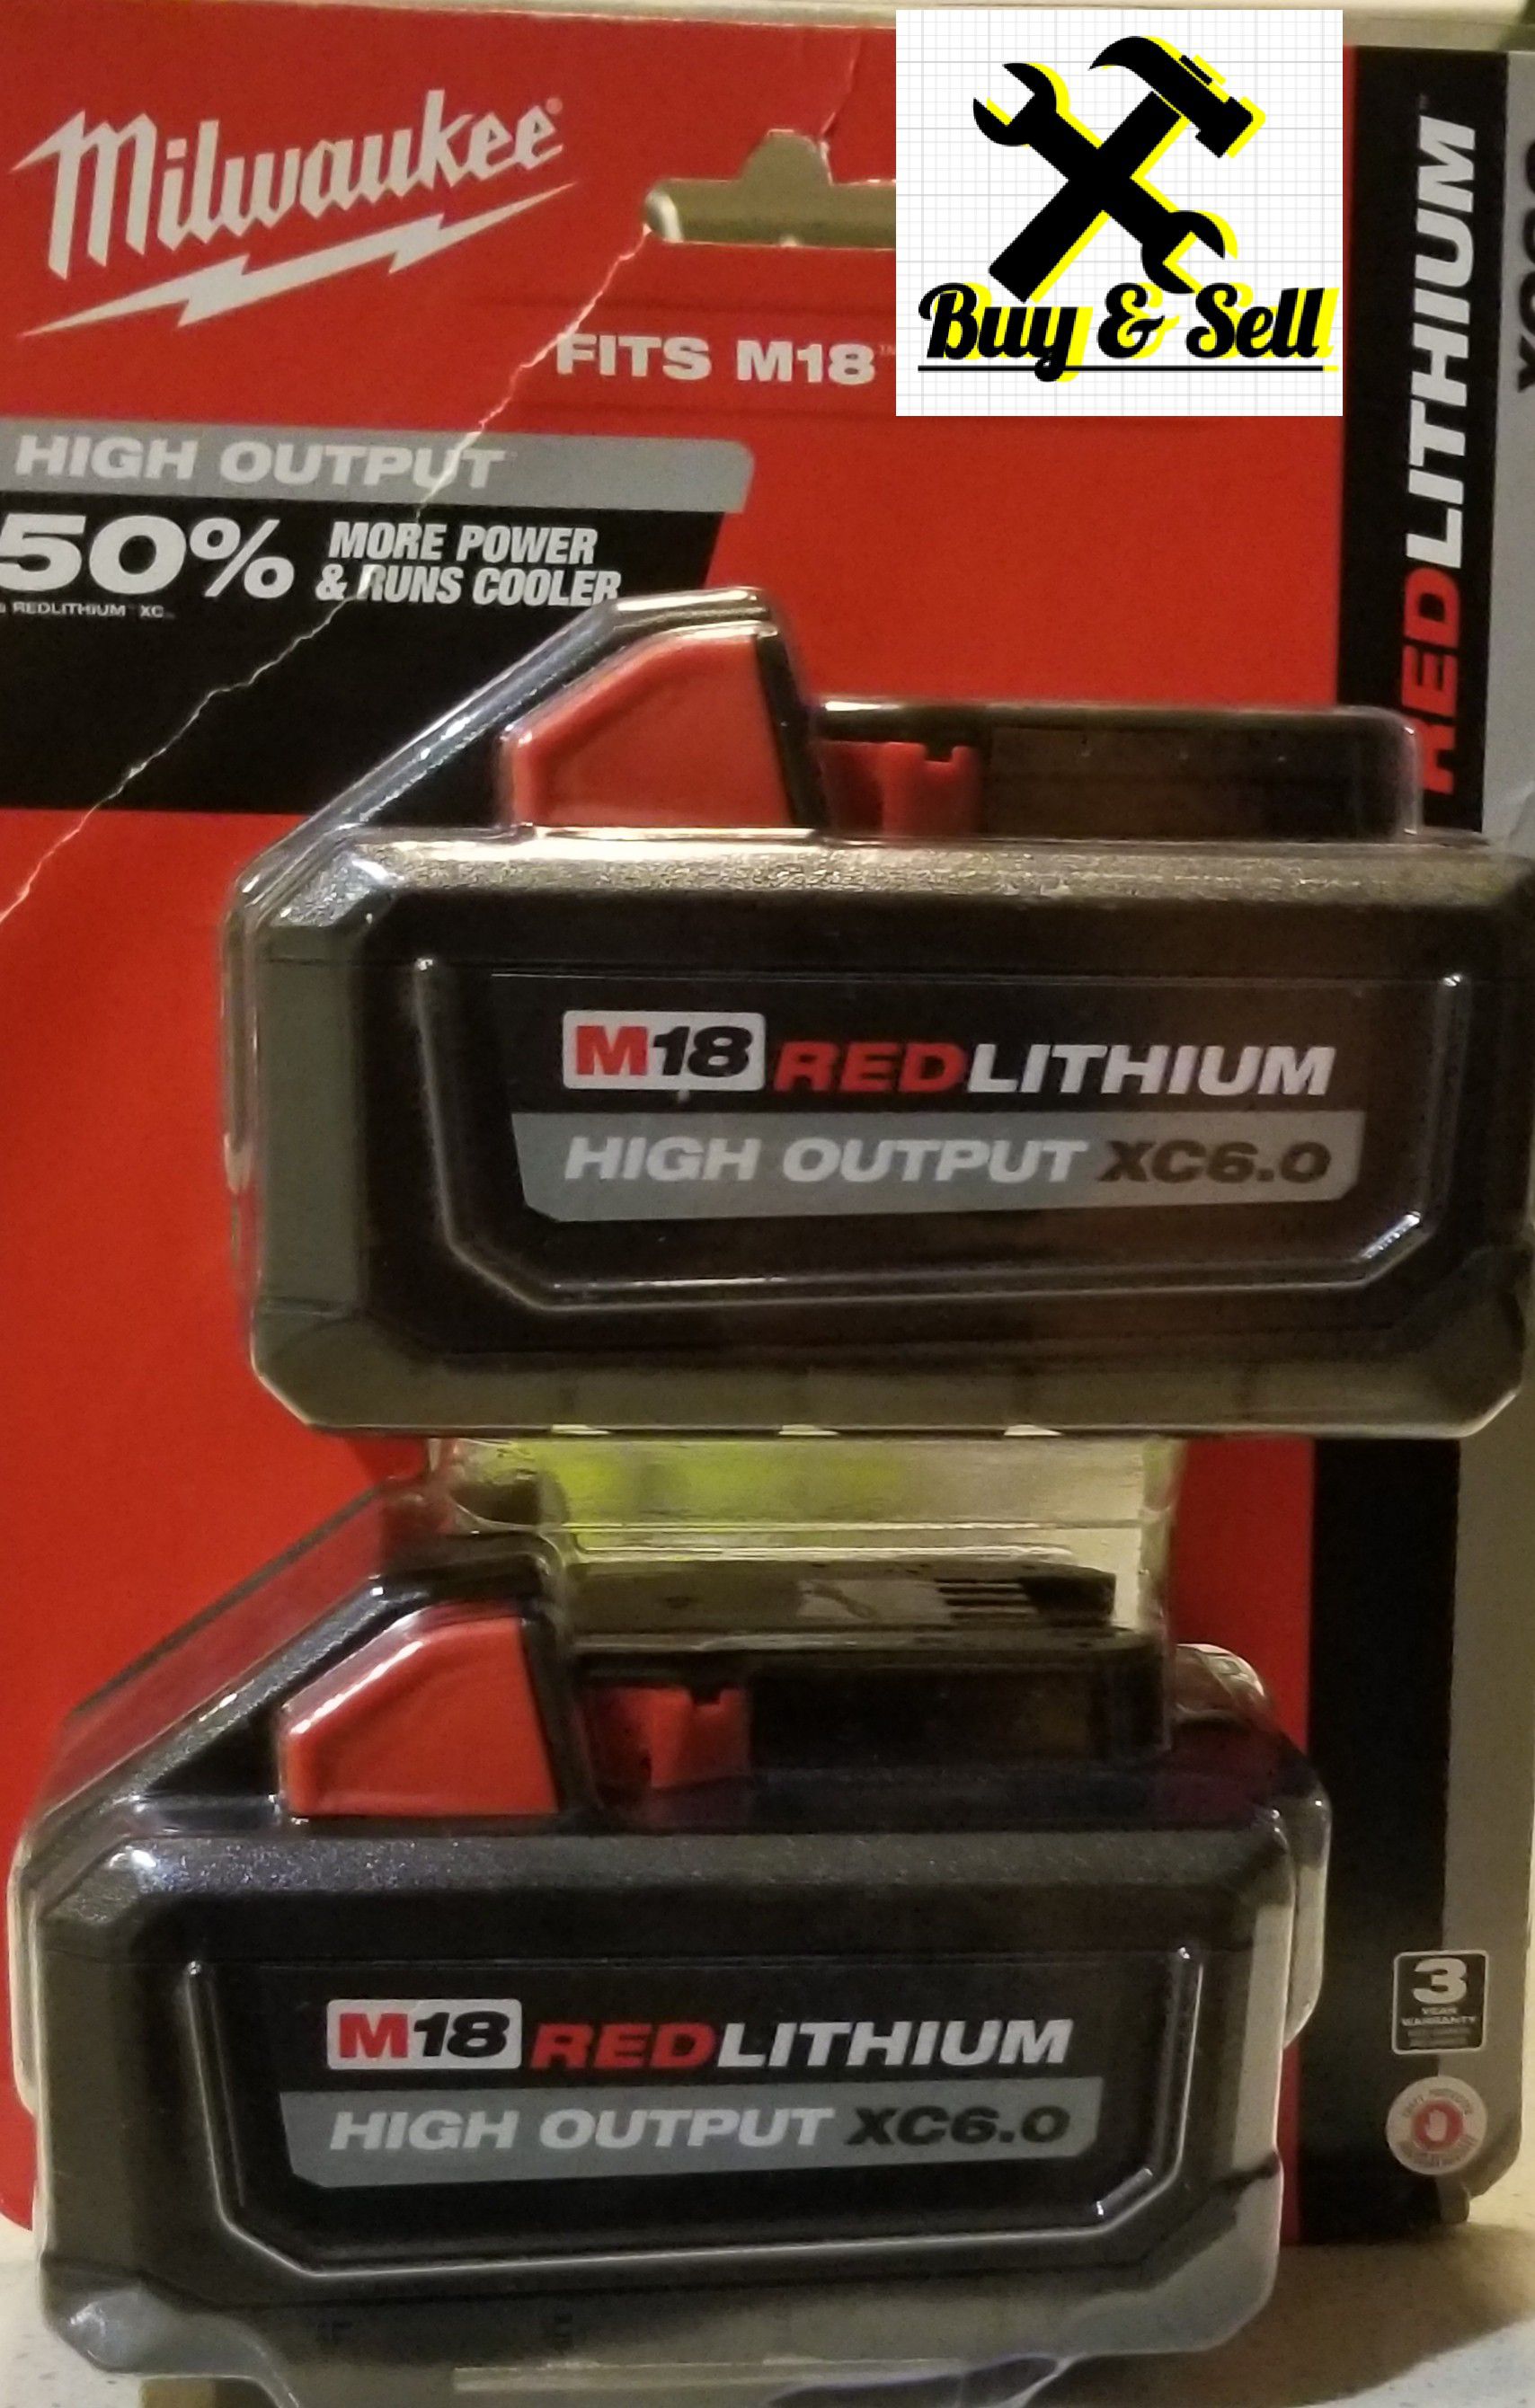 Milwaukee M18 red lithium high output HD 6.0 batteries